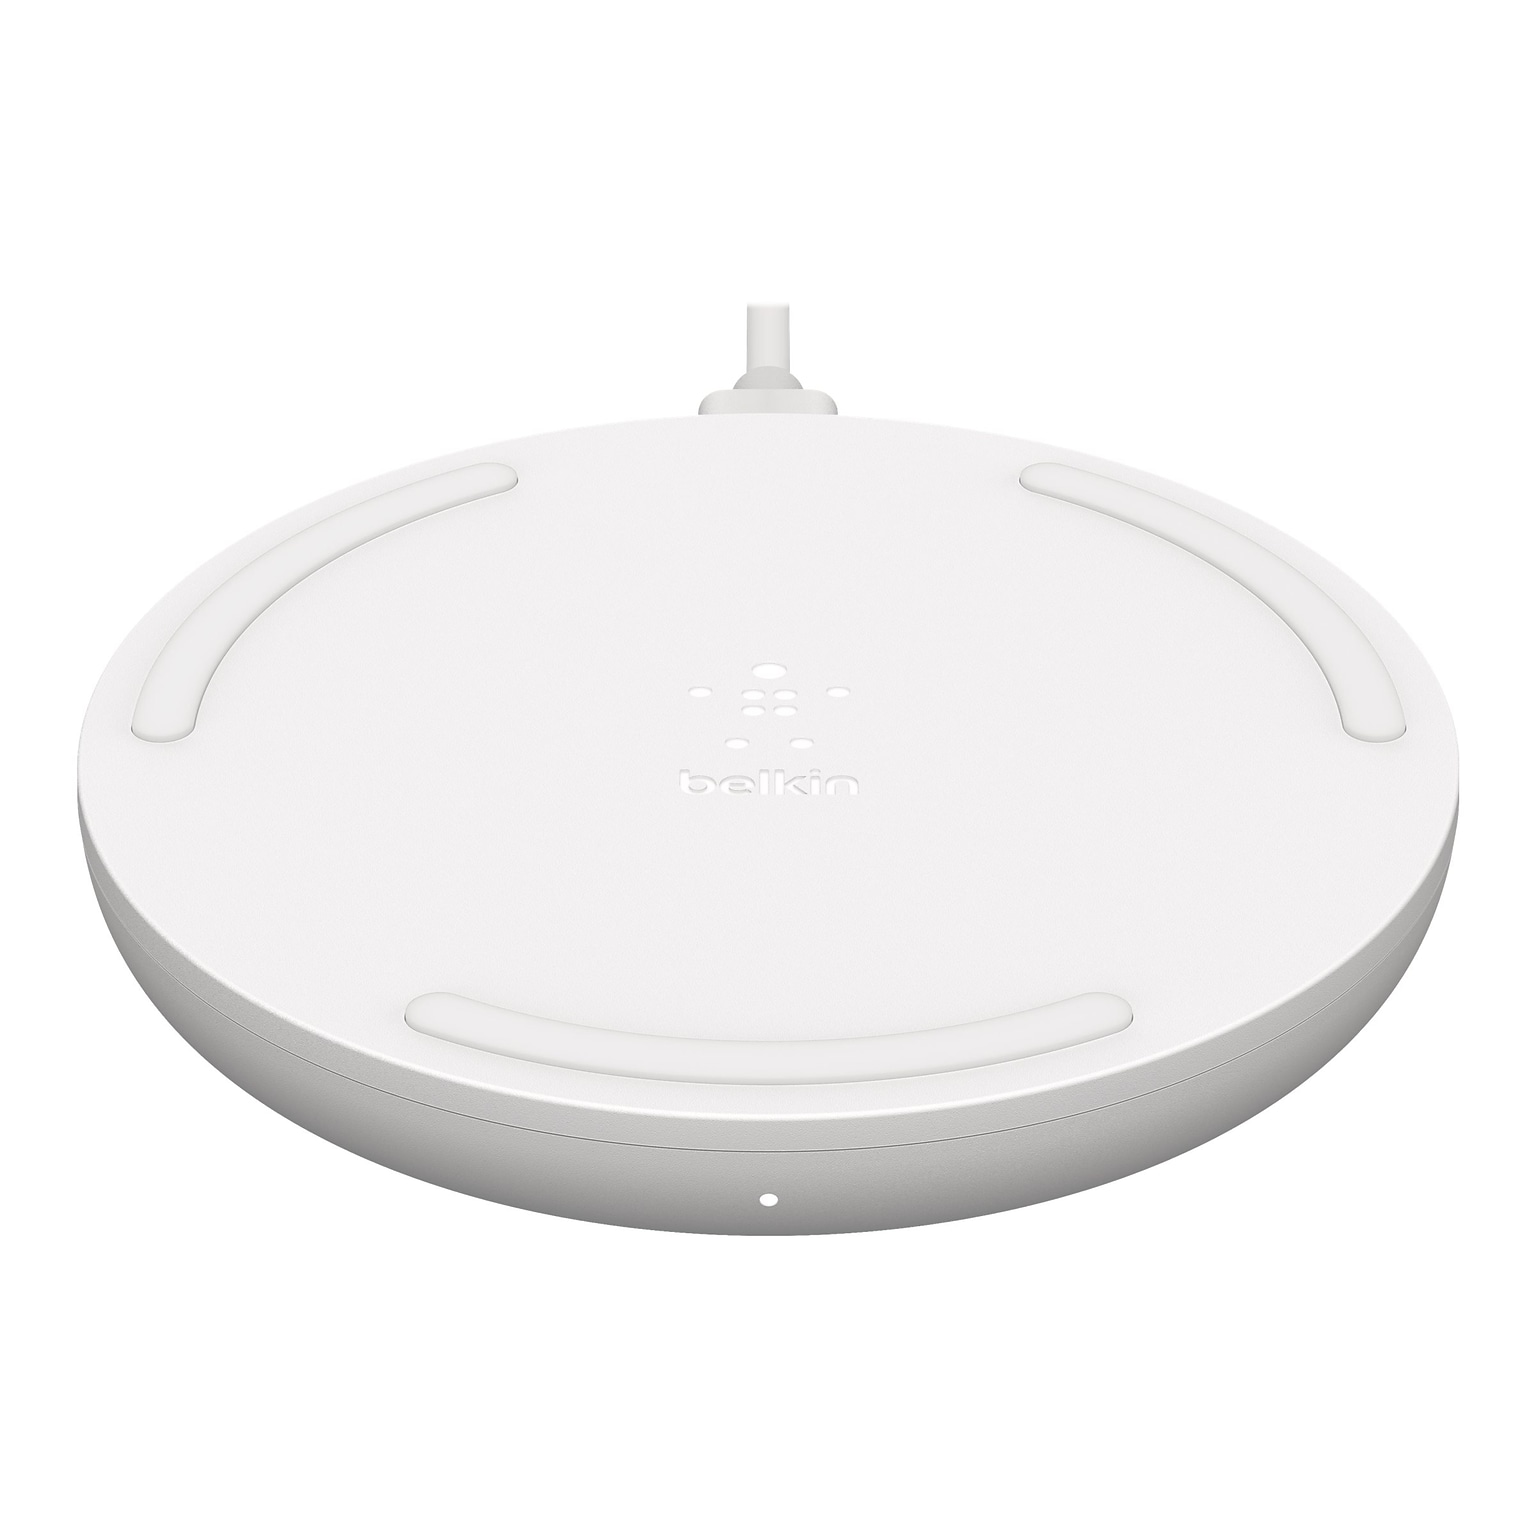 Belkin BOOST CHARGE Wireless Charging Pad for Most Smartphones, White (WIA001TTWH)